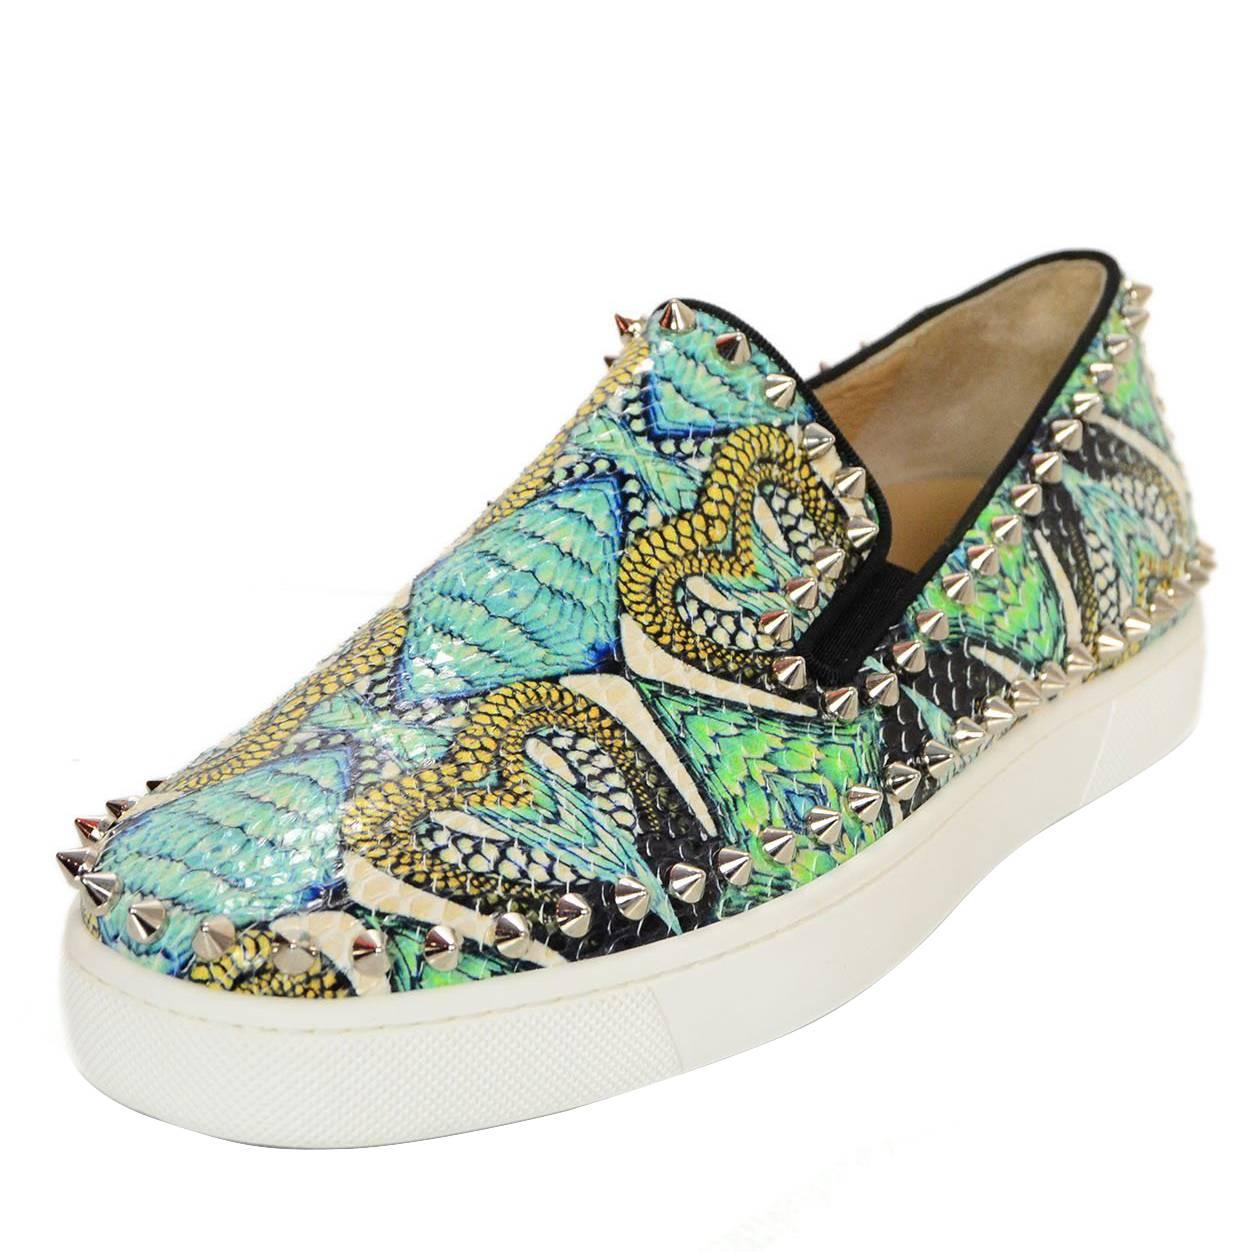 Christian Louboutin Blue and Green Printed Python Stud Sneakers Sz 38